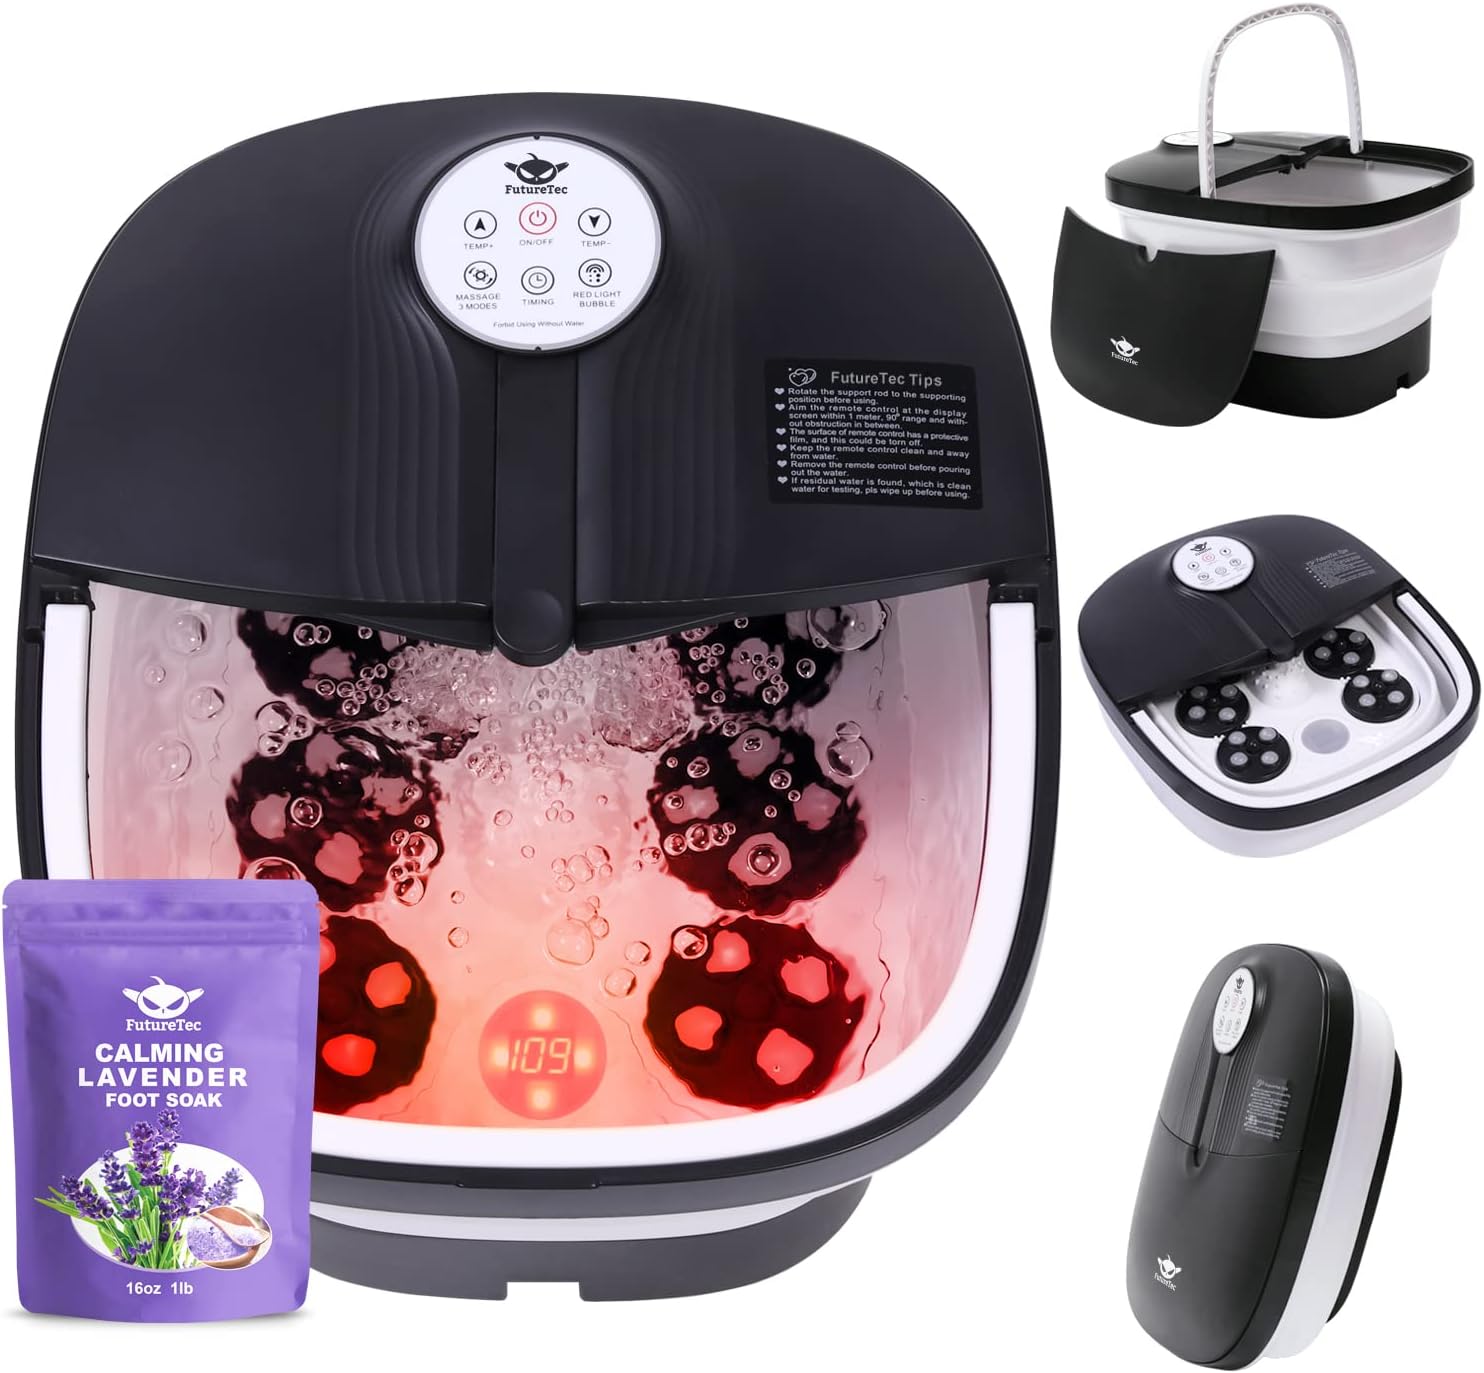 Motorized Foot Spa Bath Massager with Heat Bubbles and Vibration Massage and Jets, 16OZ Lavender Foot Soak Epsom Salt, Collapsible Foot Bath Bucket with 24 Auto Massage Balls, Infrared & Remote